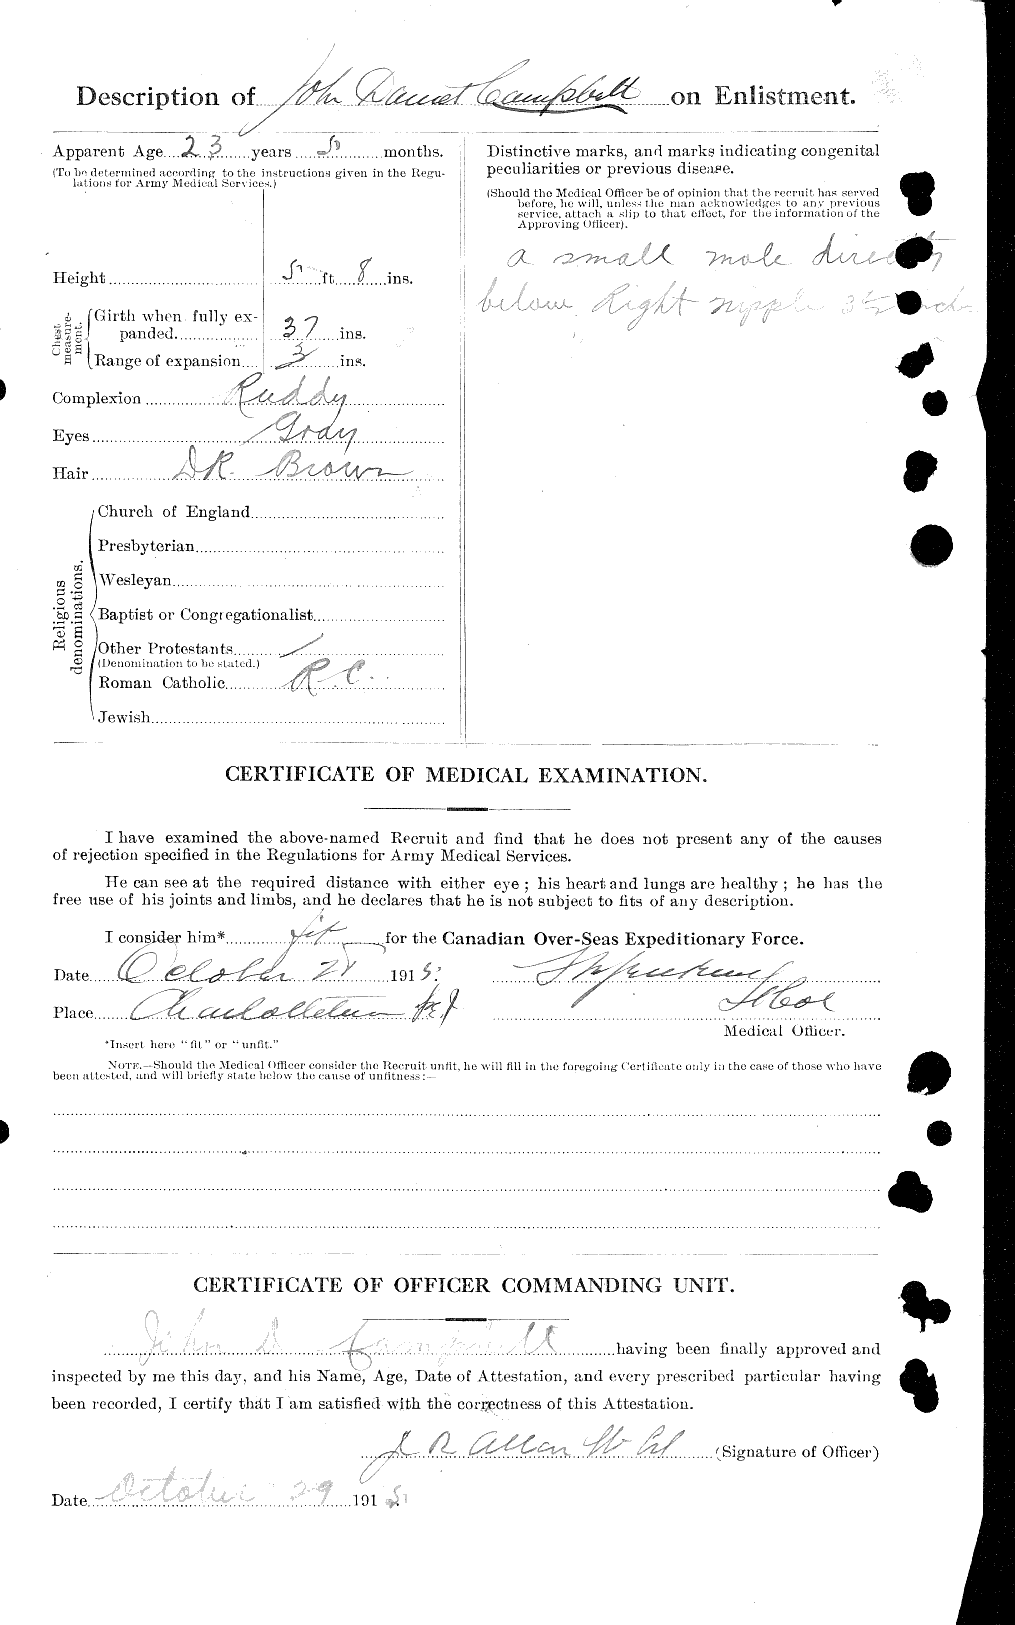 Personnel Records of the First World War - CEF 006889b